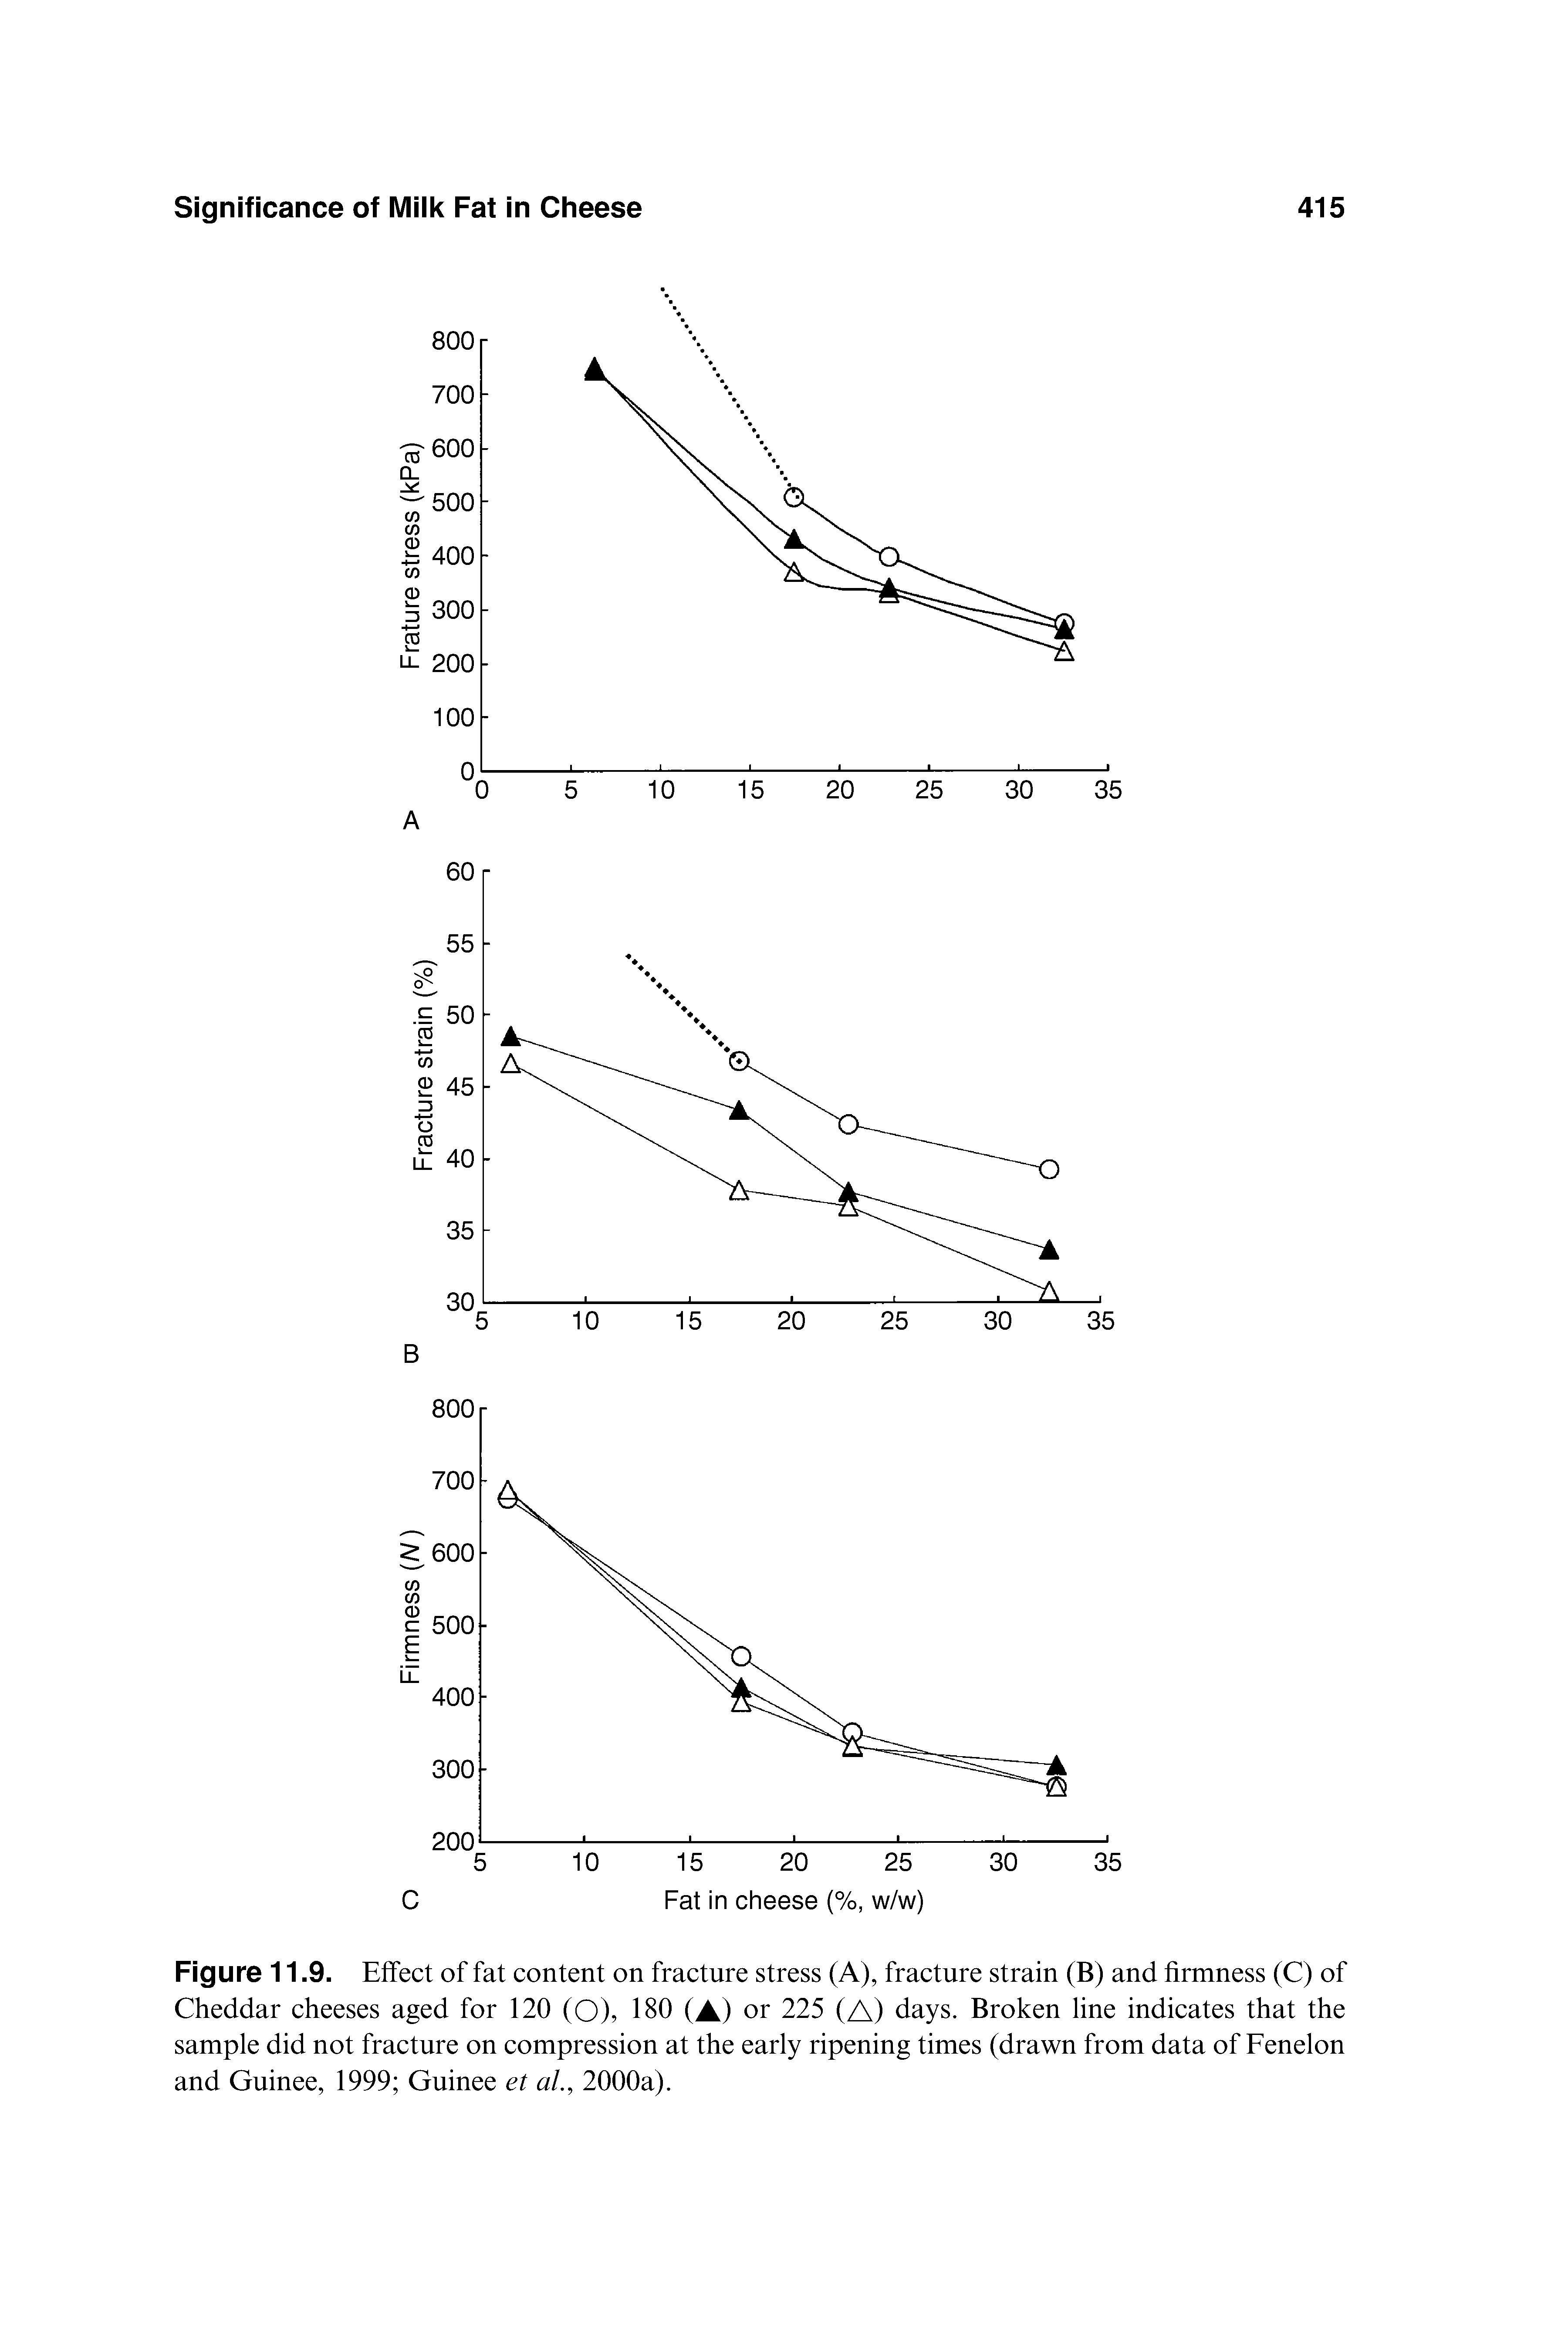 Figure 11.9. Effect of fat content on fracture stress (A), fracture strain (B) and firmness (C) of Cheddar cheeses aged for 120 (O), 180 (A,) or 225 (A) days. Broken line indicates that the sample did not fracture on compression at the early ripening times (drawn from data of Fenelon and Guinee, 1999 Guinee et al., 2000a).